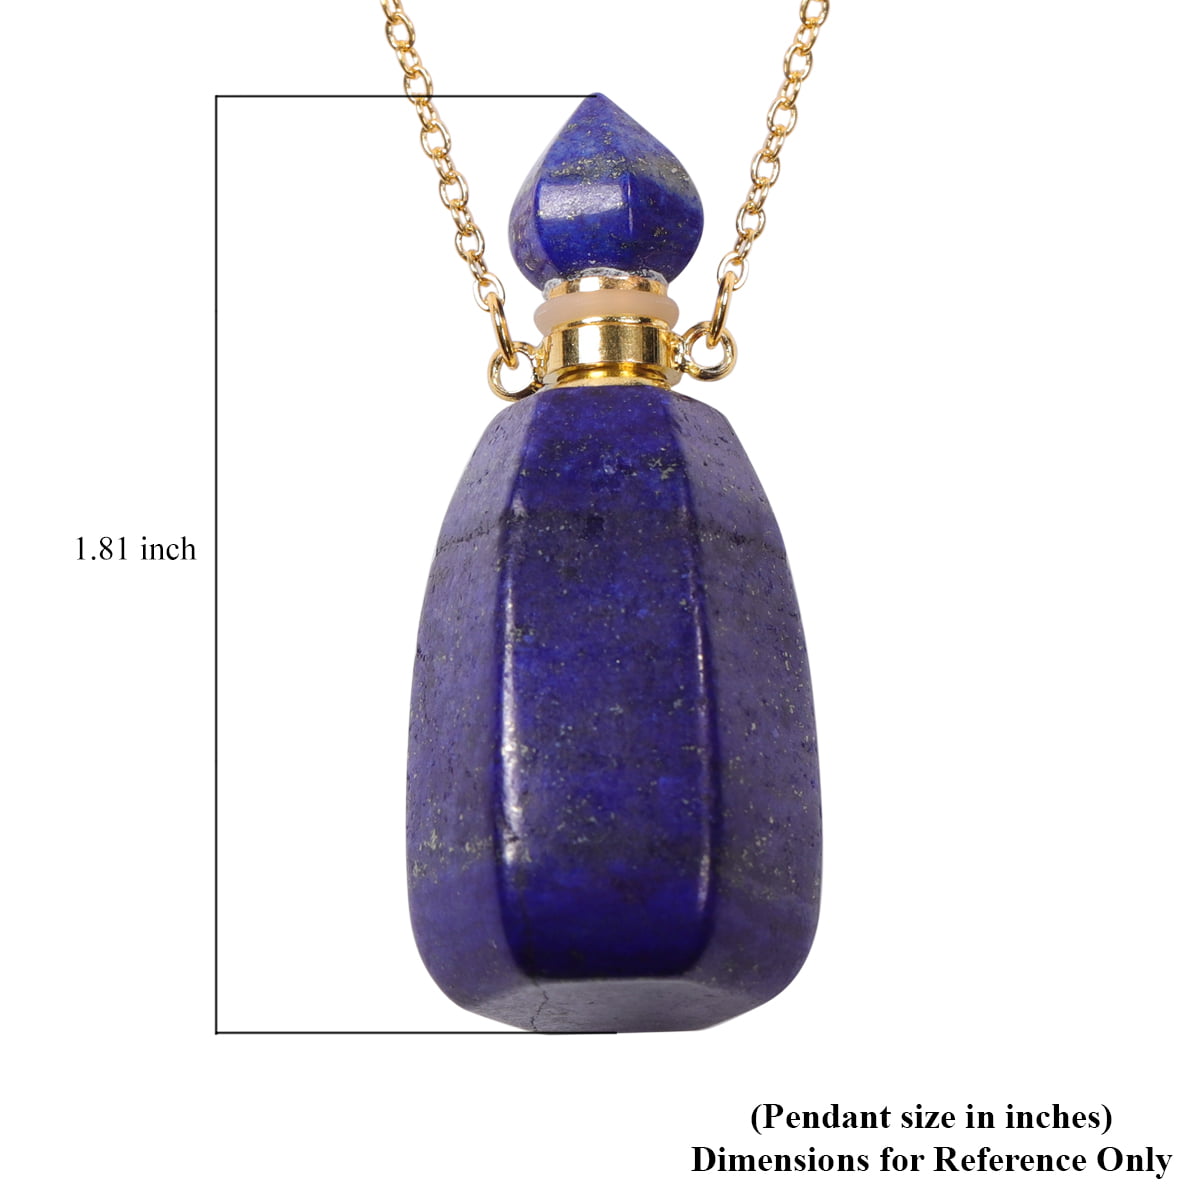 Semi-Precious Necklace/ Gift for Her Dainty Necklace. Women's Necklace Lapis Lazuli and Multi Quartz Necklace /Silver Sterling